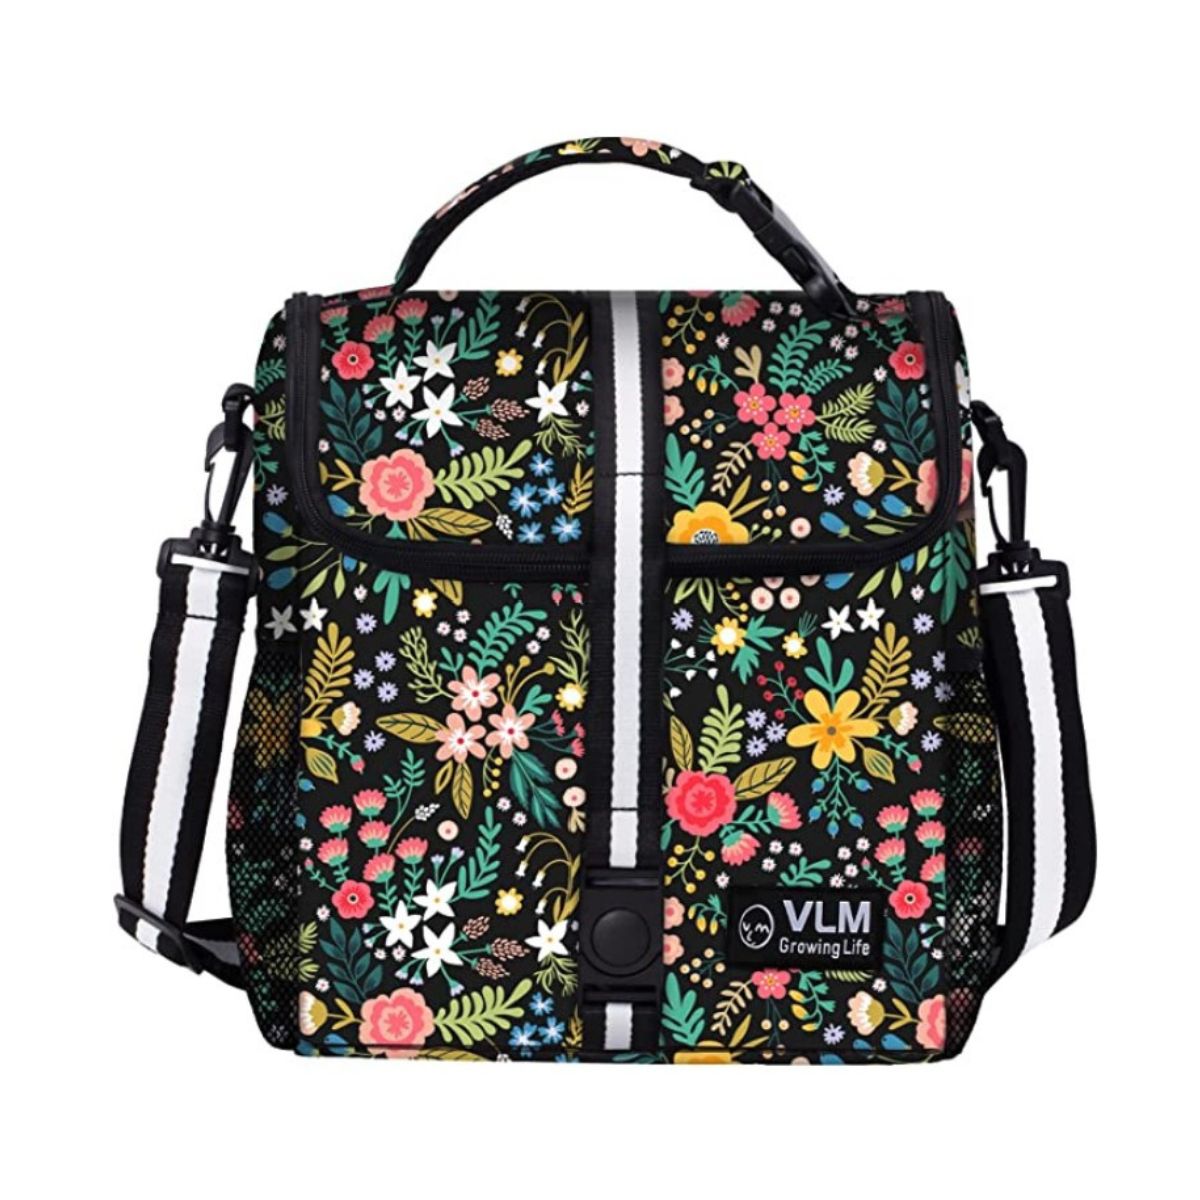 Floral patterned insulated lunch box